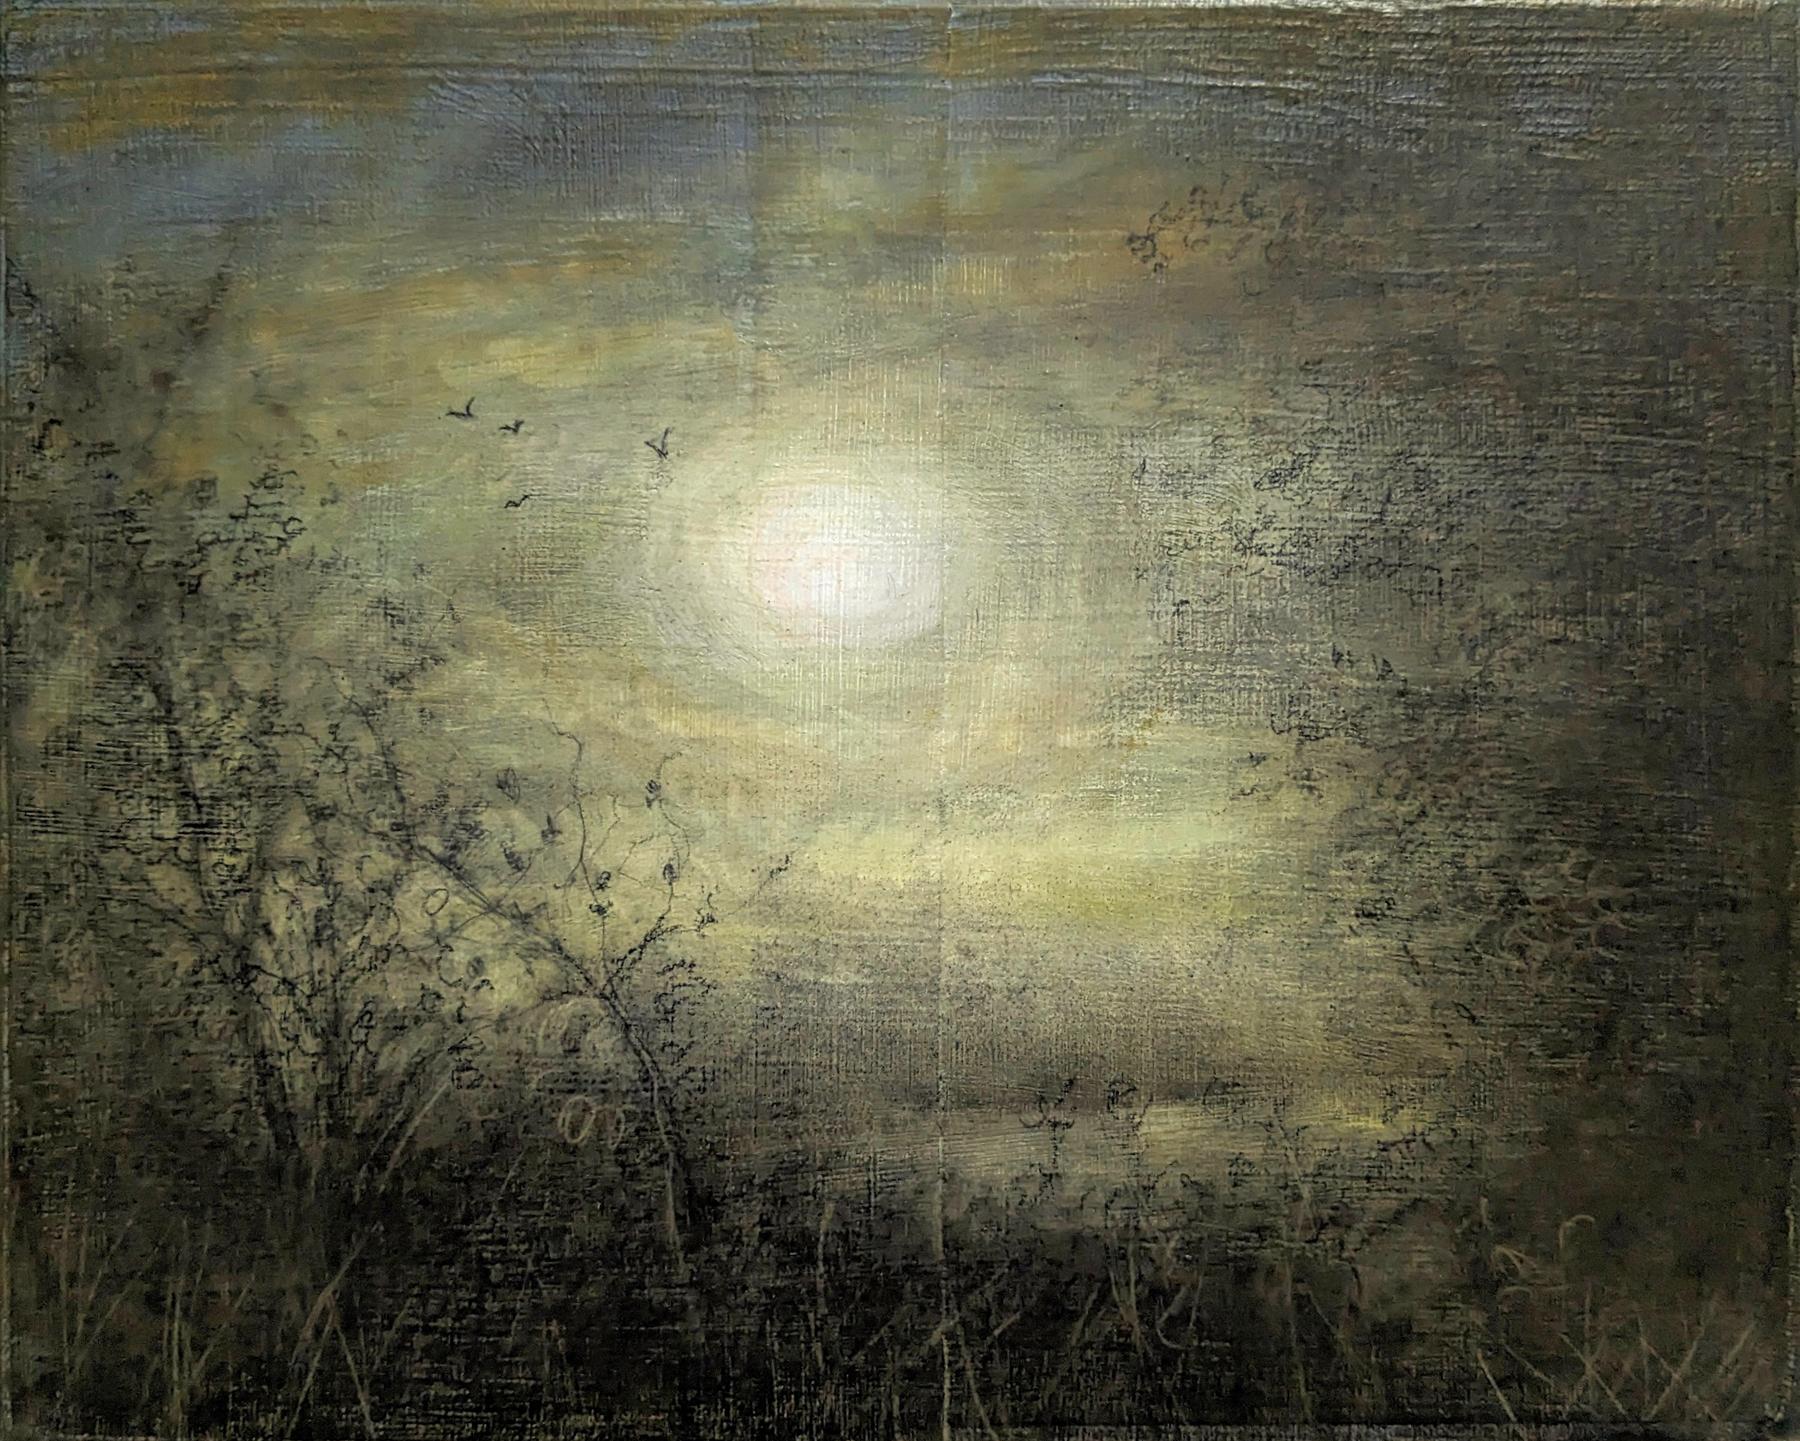 Green Nocturne (Charcoal Landscape Drawing of Full Moon on Wood Panel)